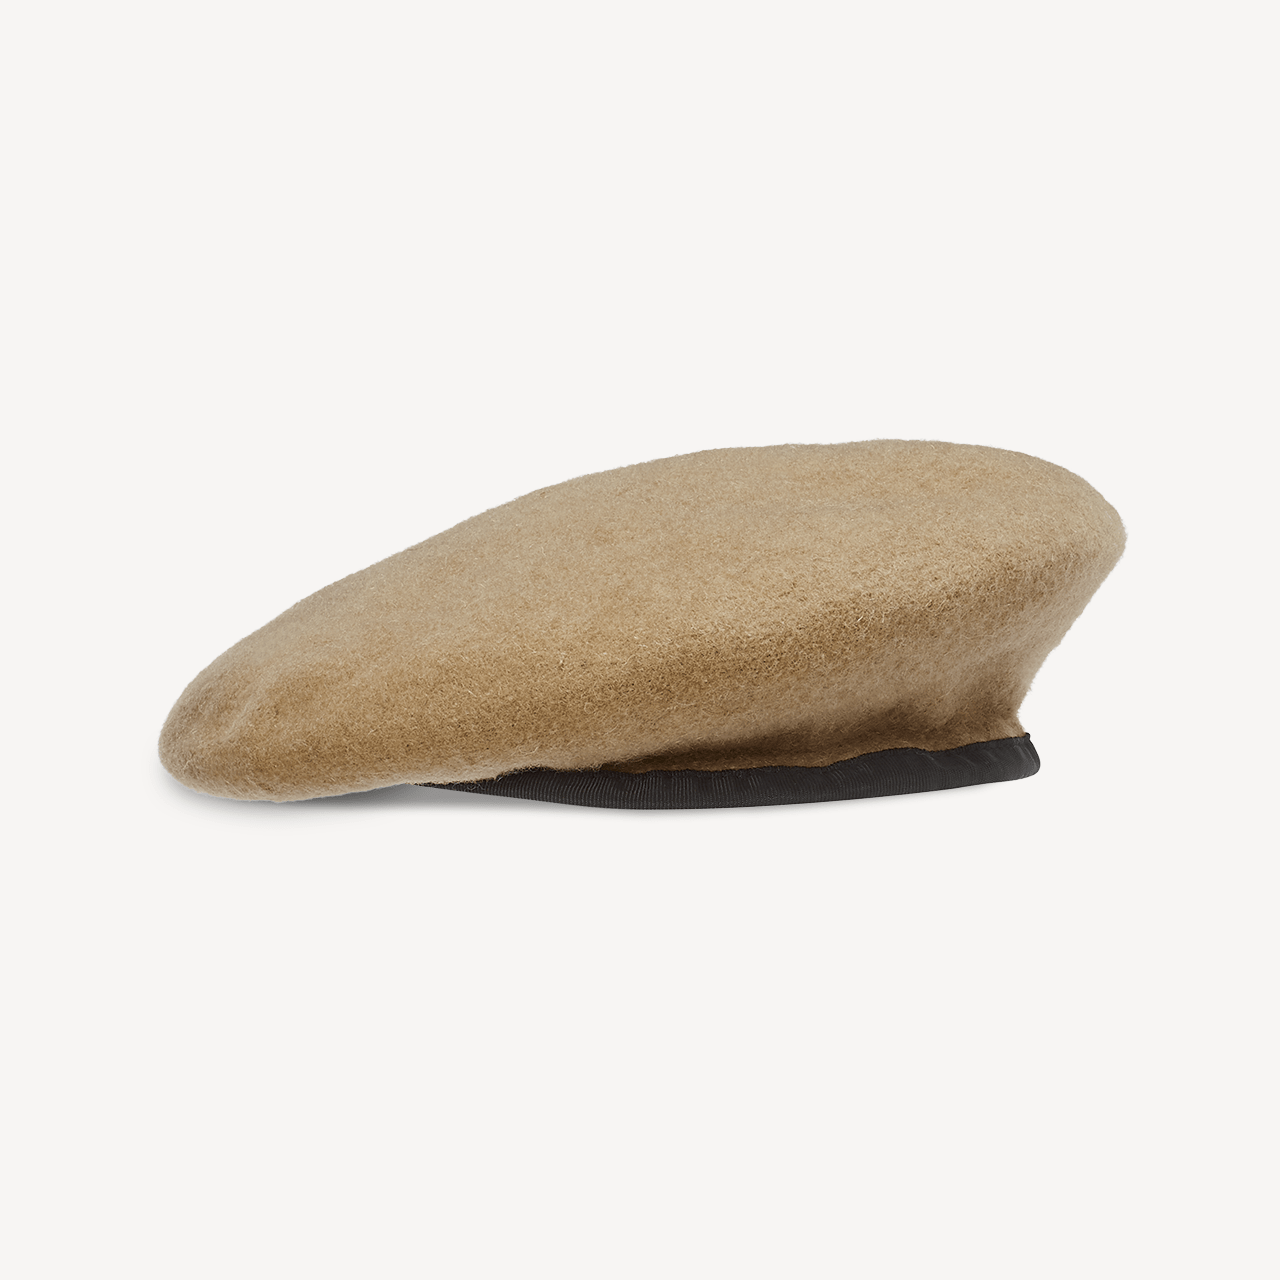 Military Beret in Sand - Swaine